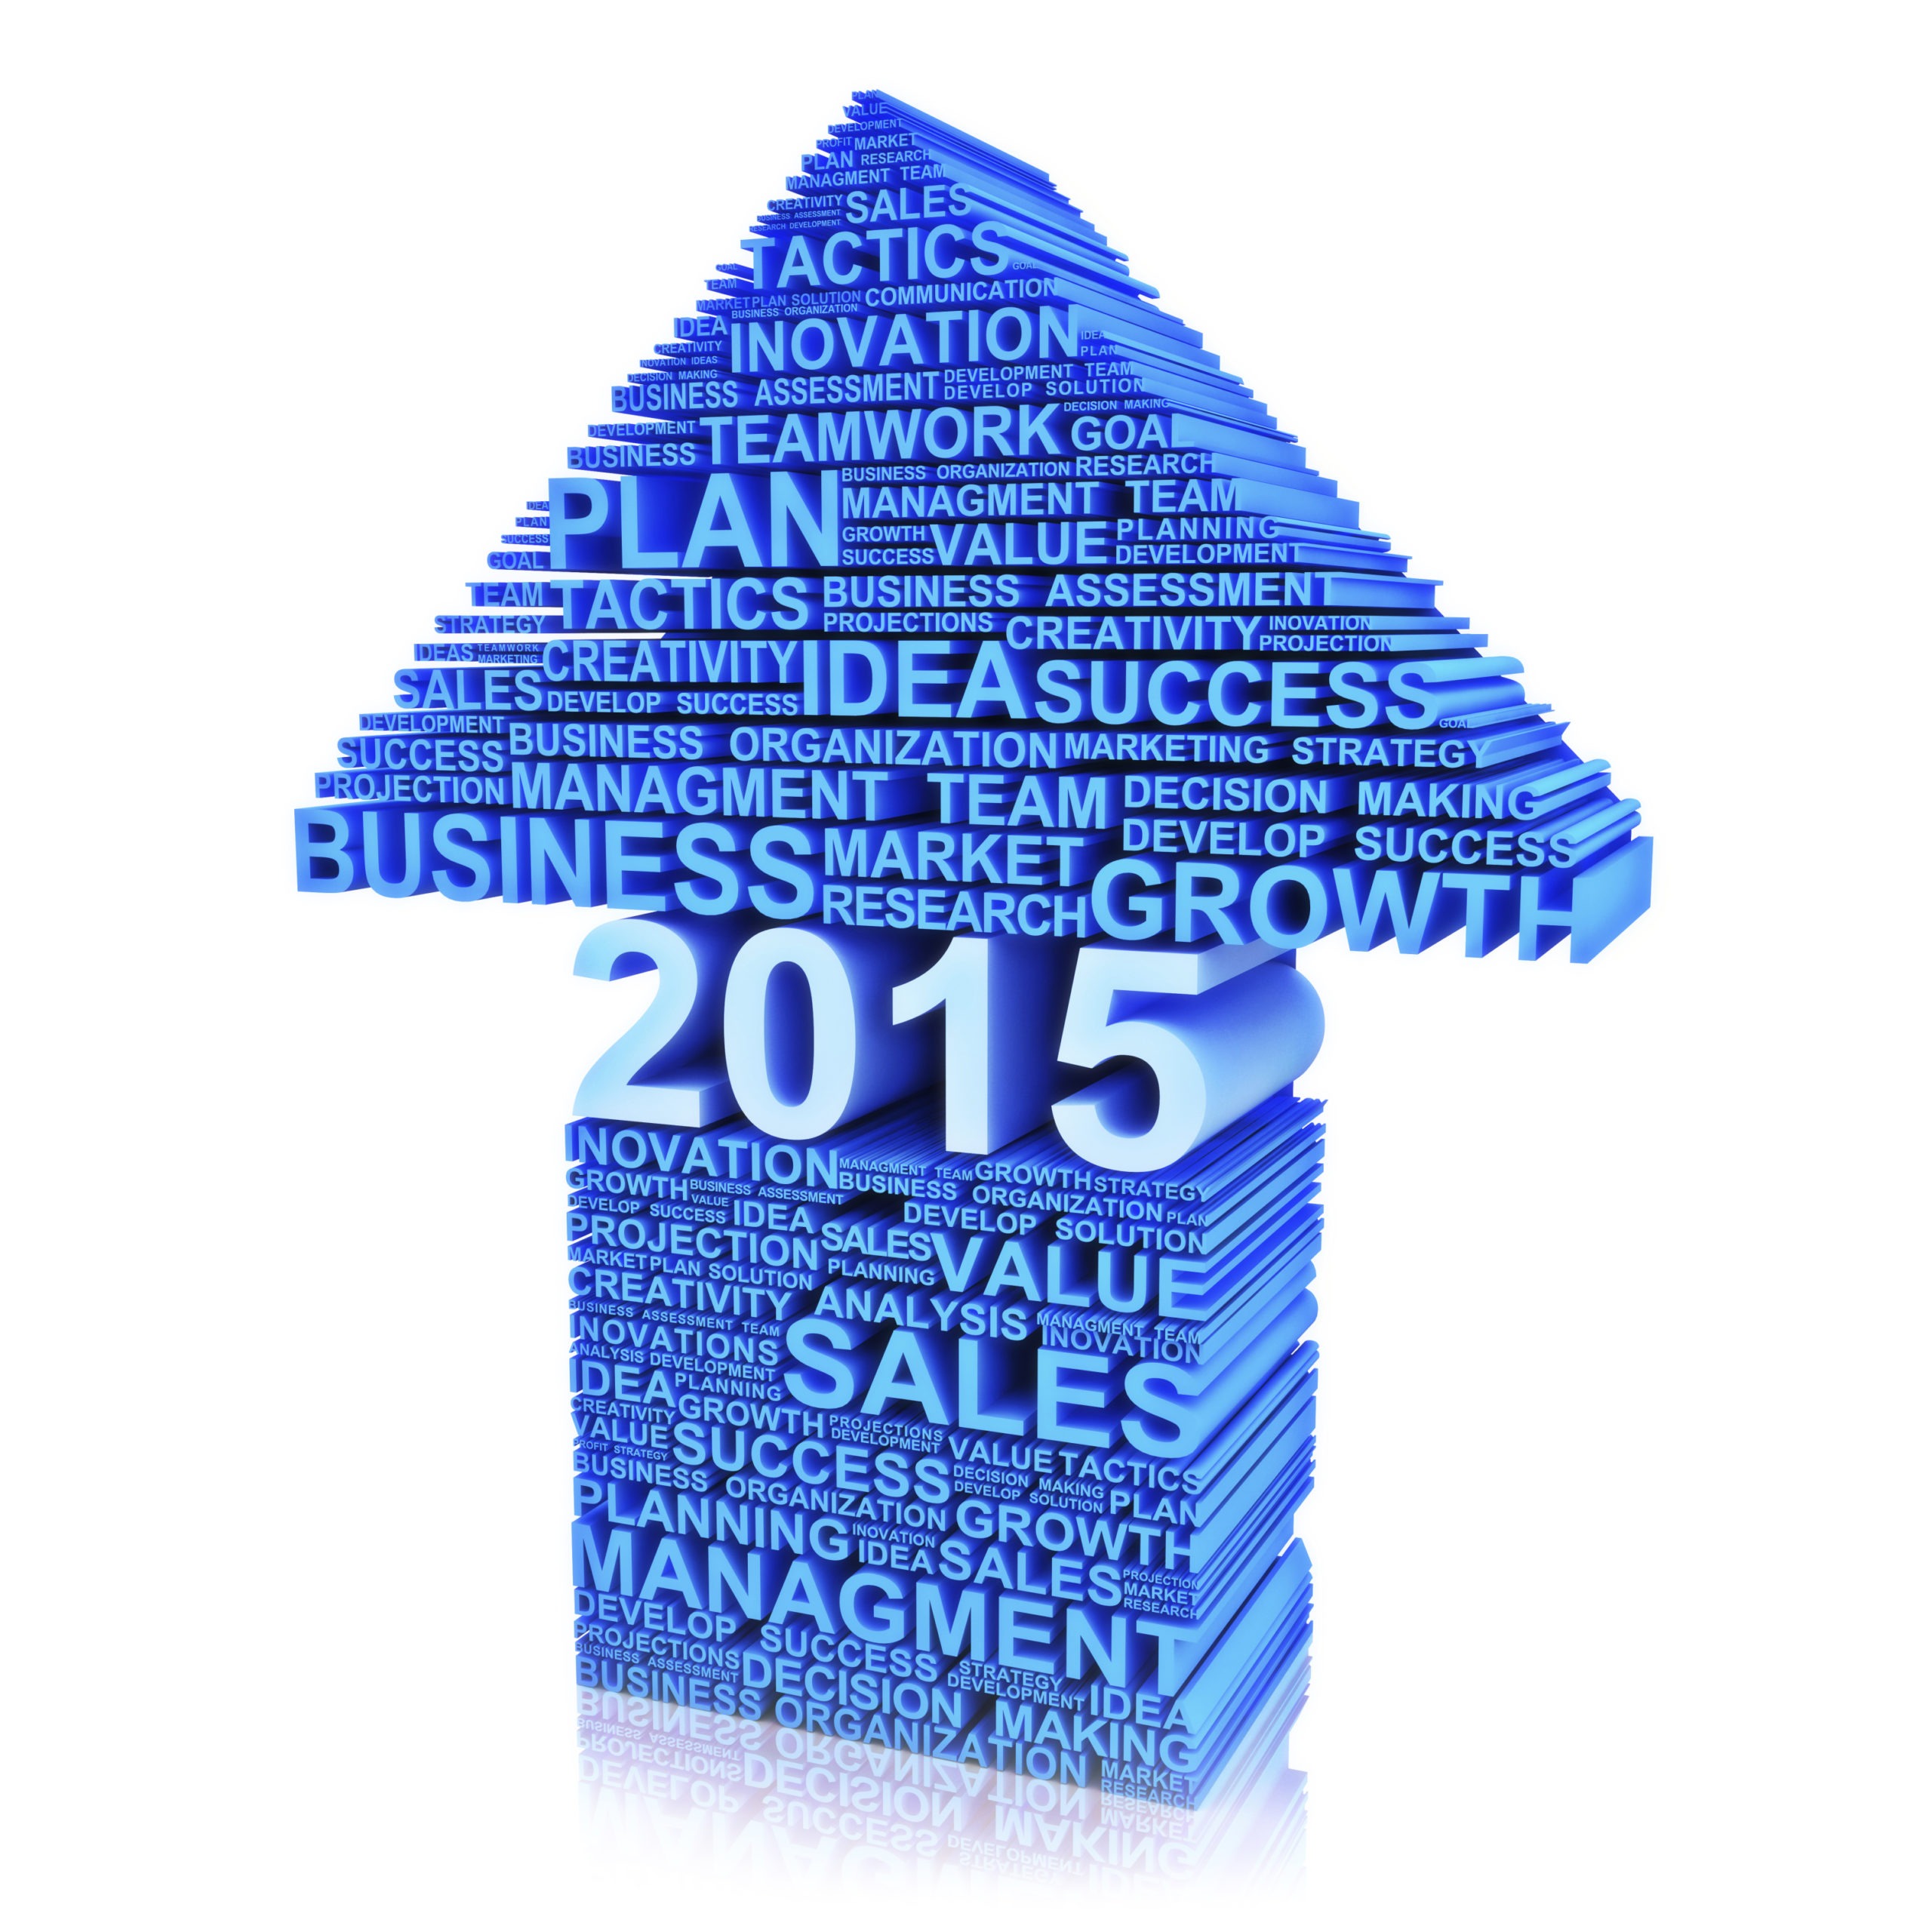 Marketing Your Financial Advisory Firm in 2015